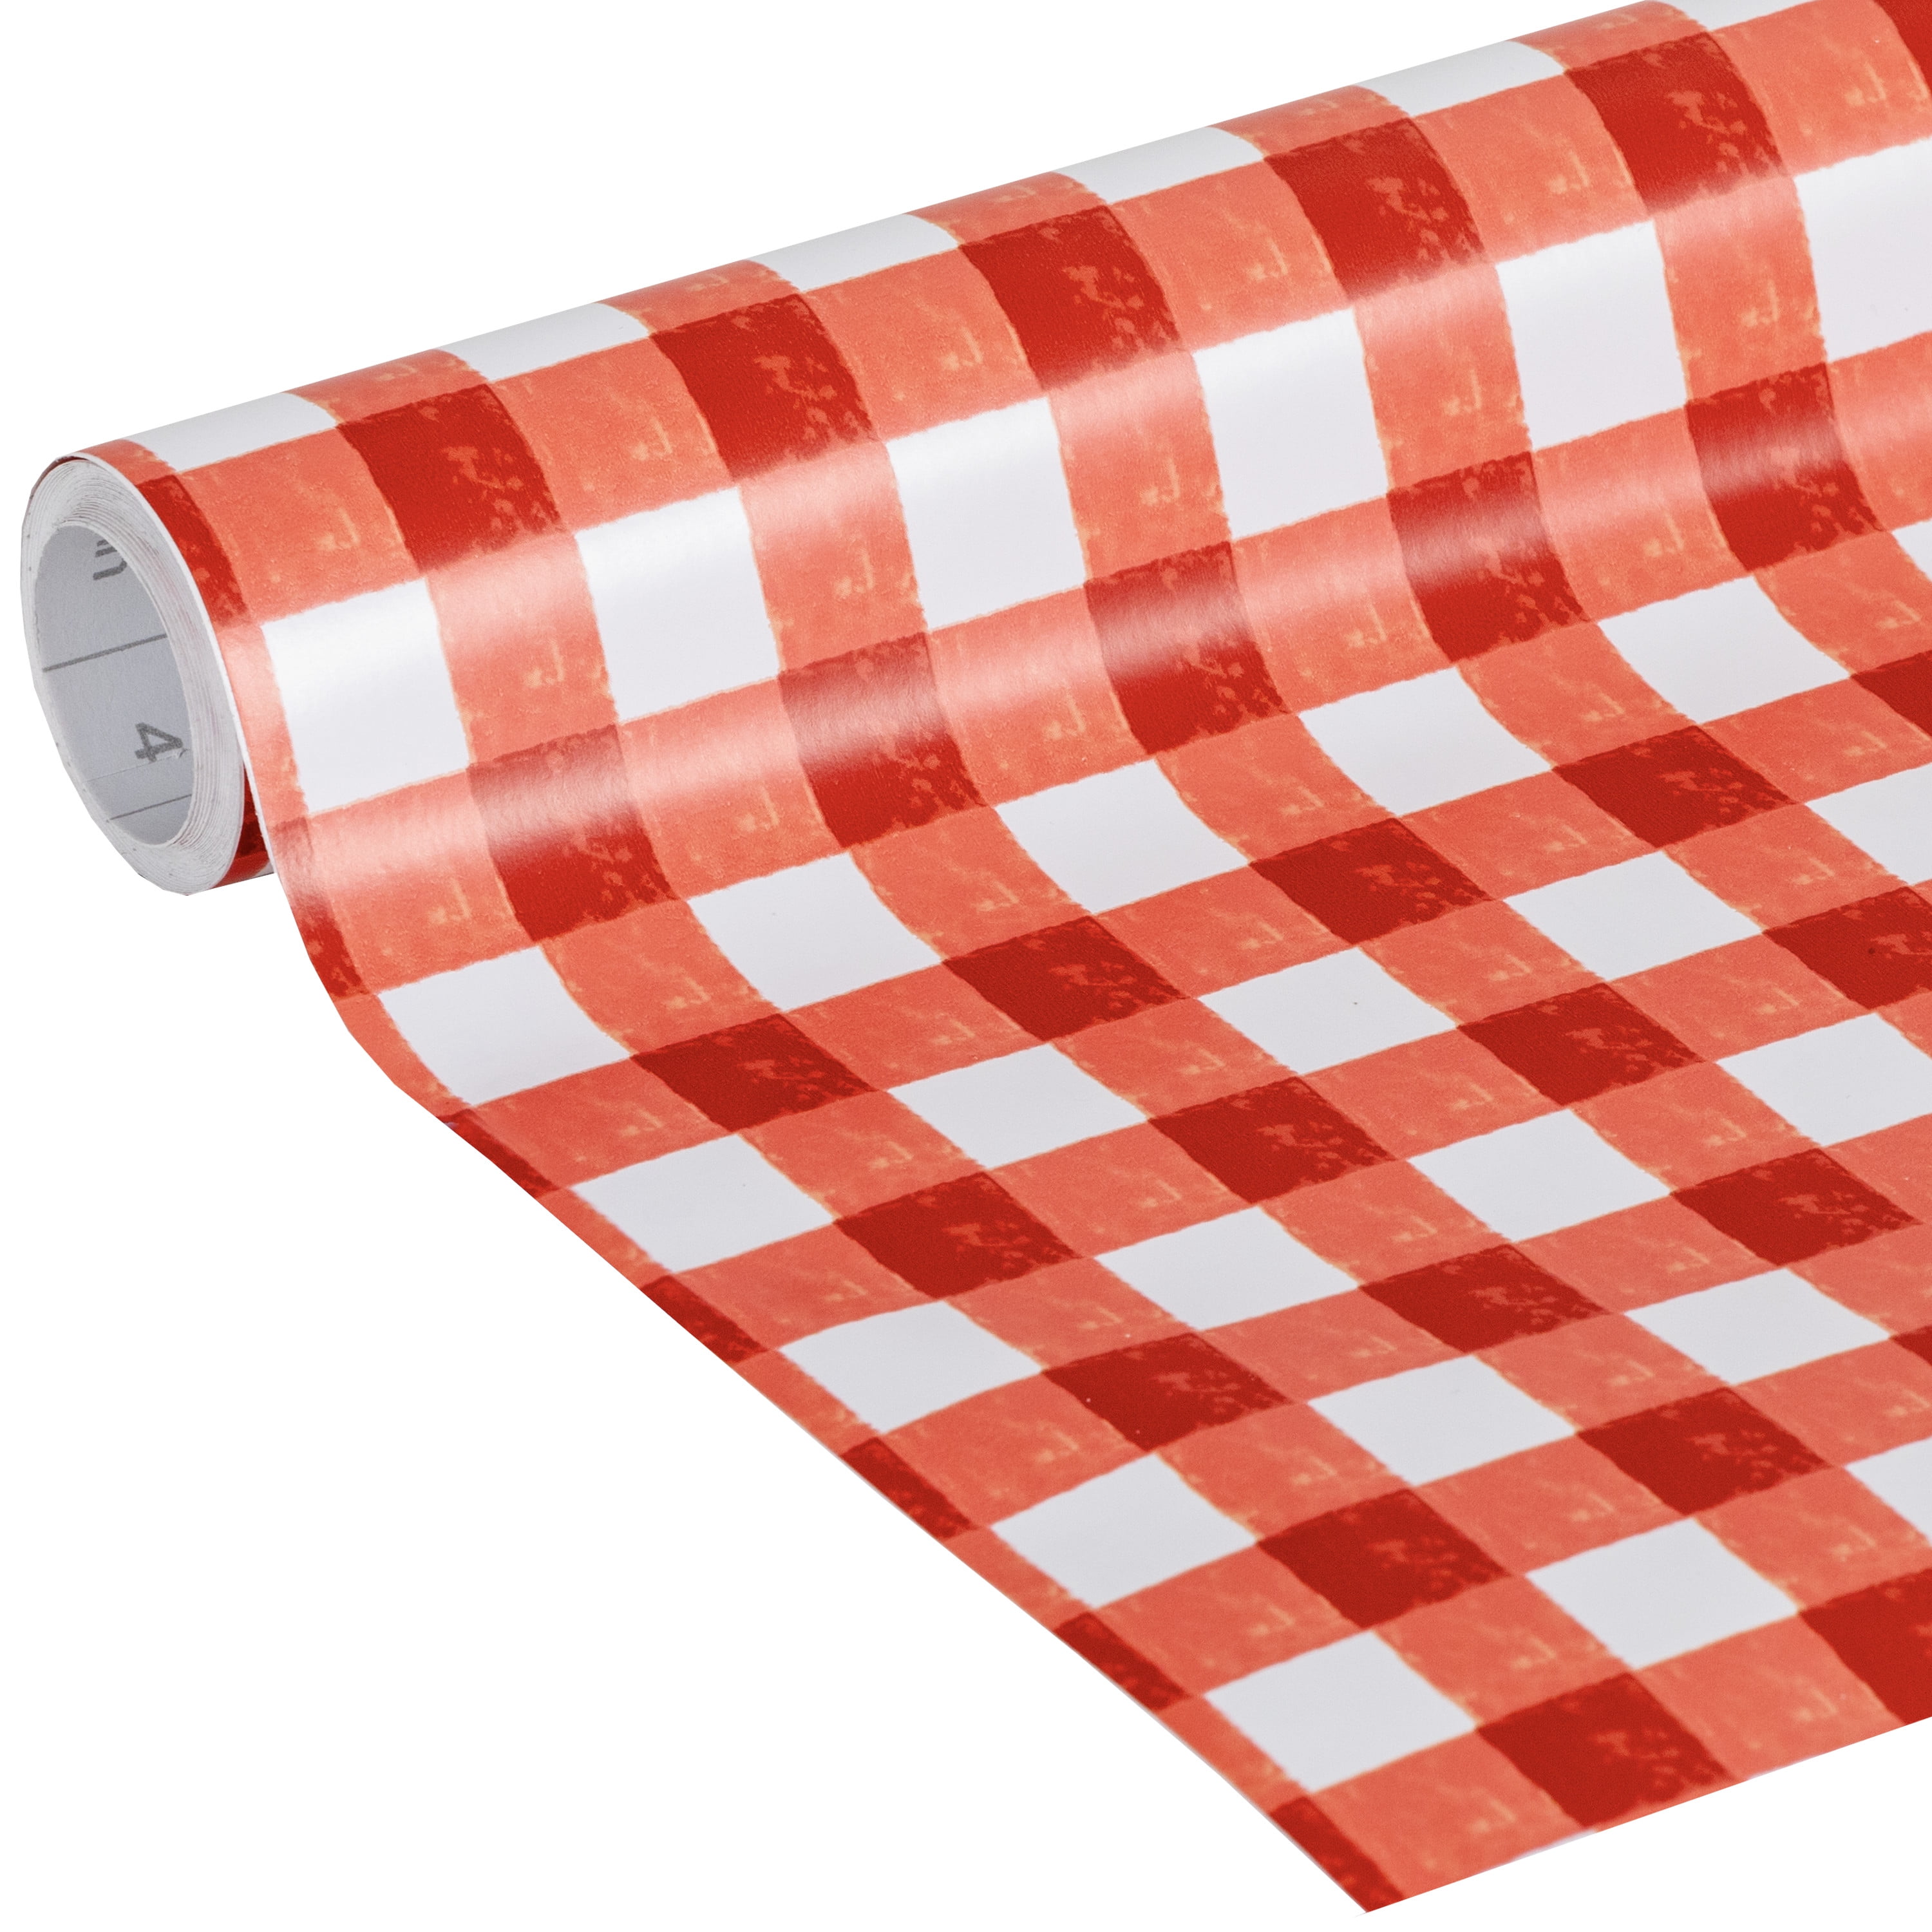 The Pioneer Woman Adhesive Laminate 20 in. x 12 ft., Red Gingham